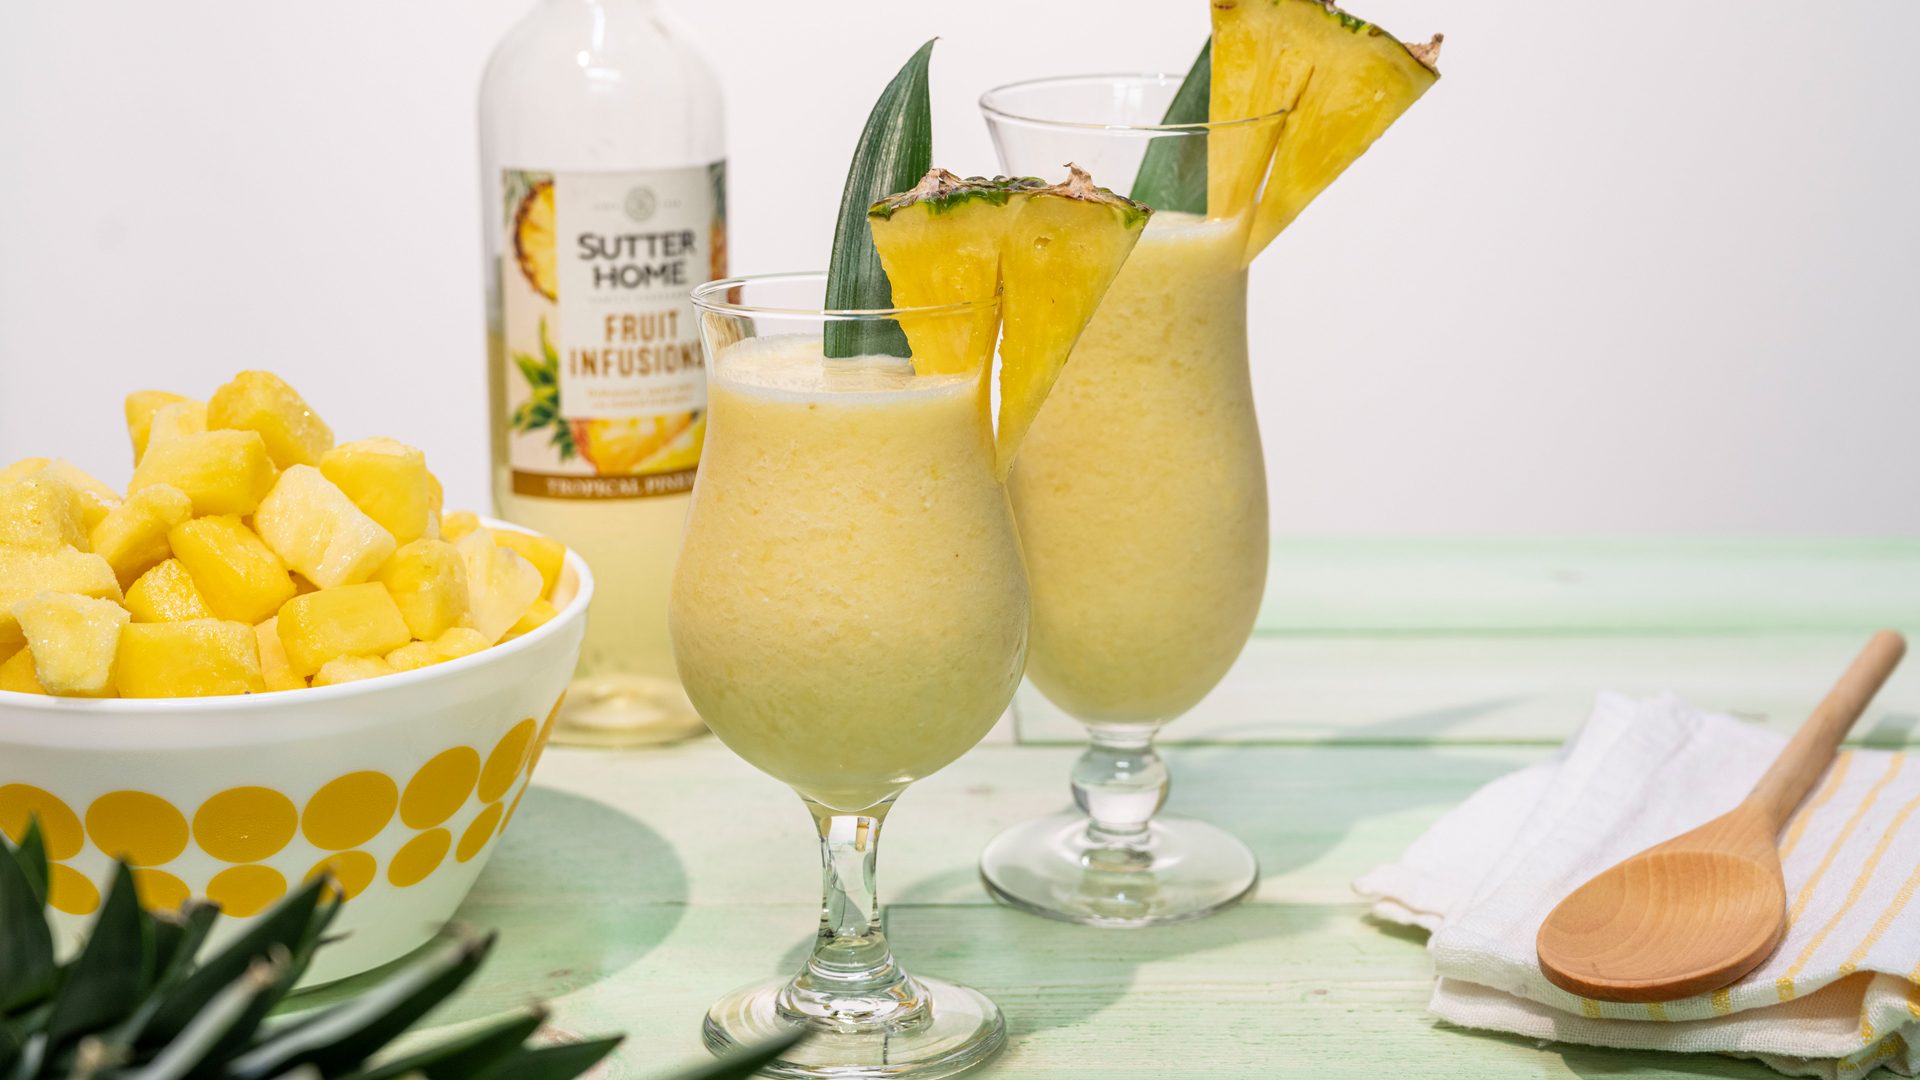 Holidays Are Happier With Our Sutter Home Fruit Infusions “Pineapple ...